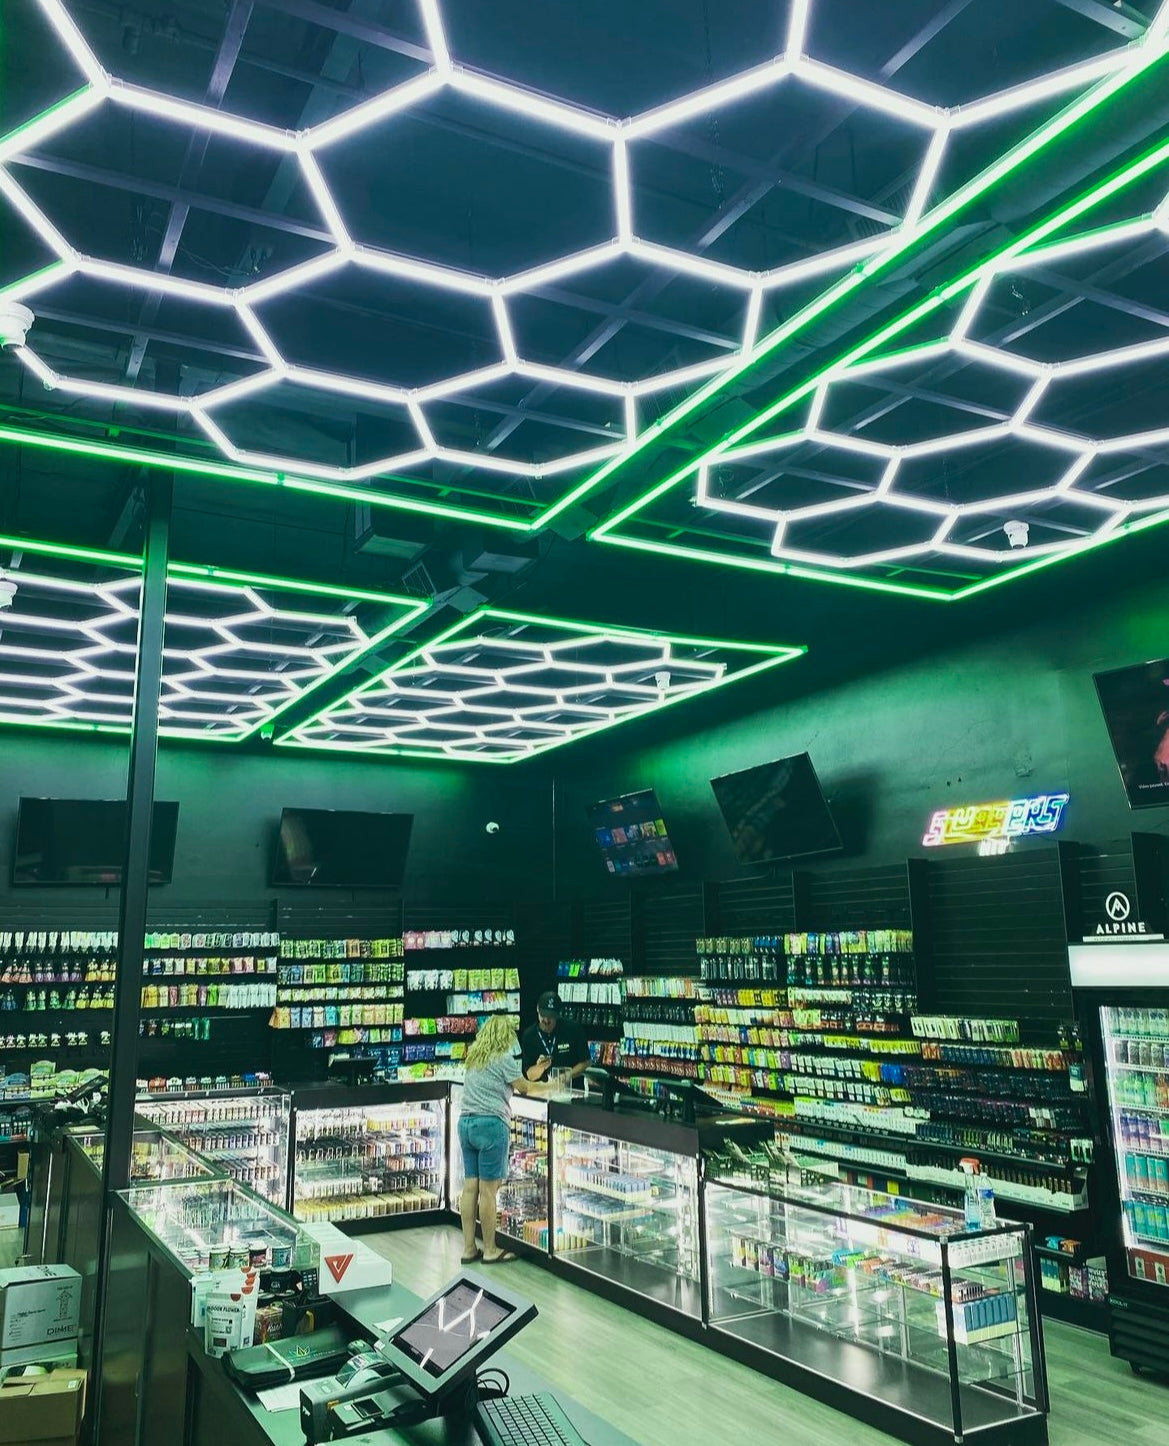 Hexagon lighting on ceiling with green LED border